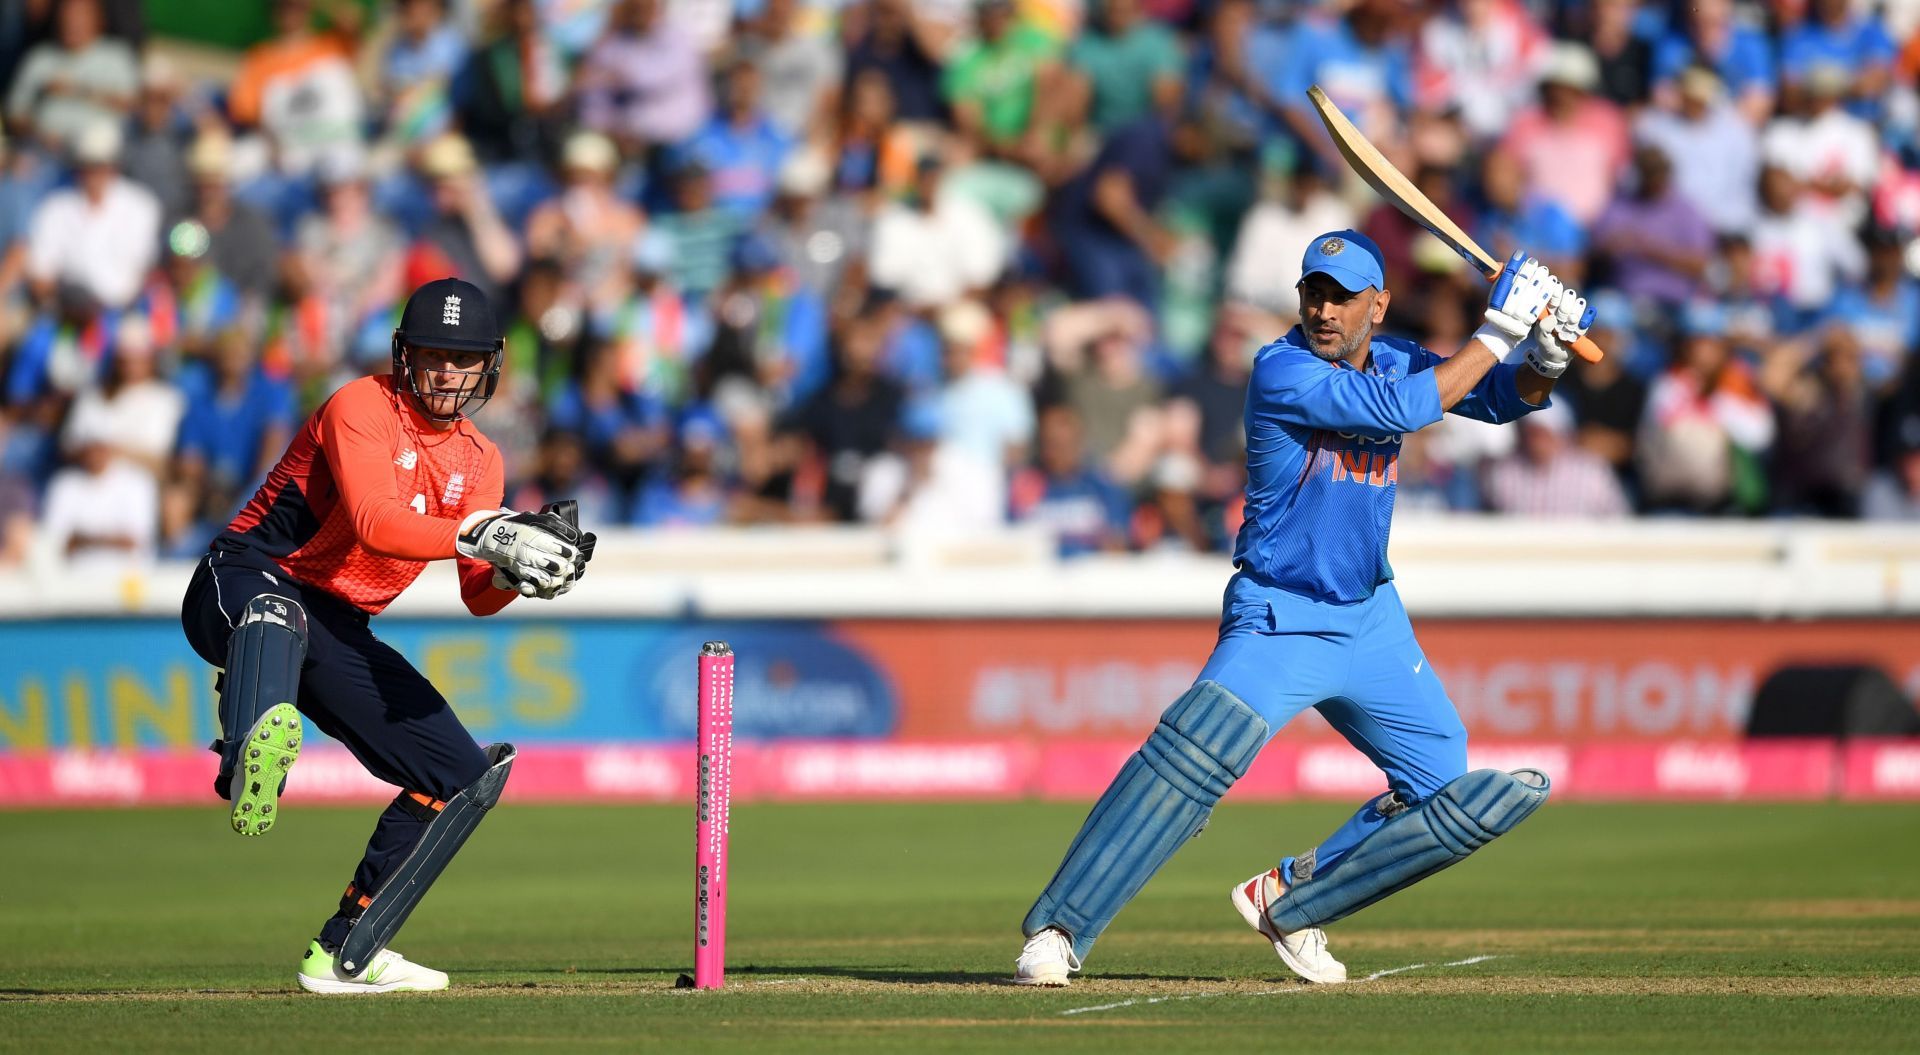 MS Dhoni played his last ODI match in 2019